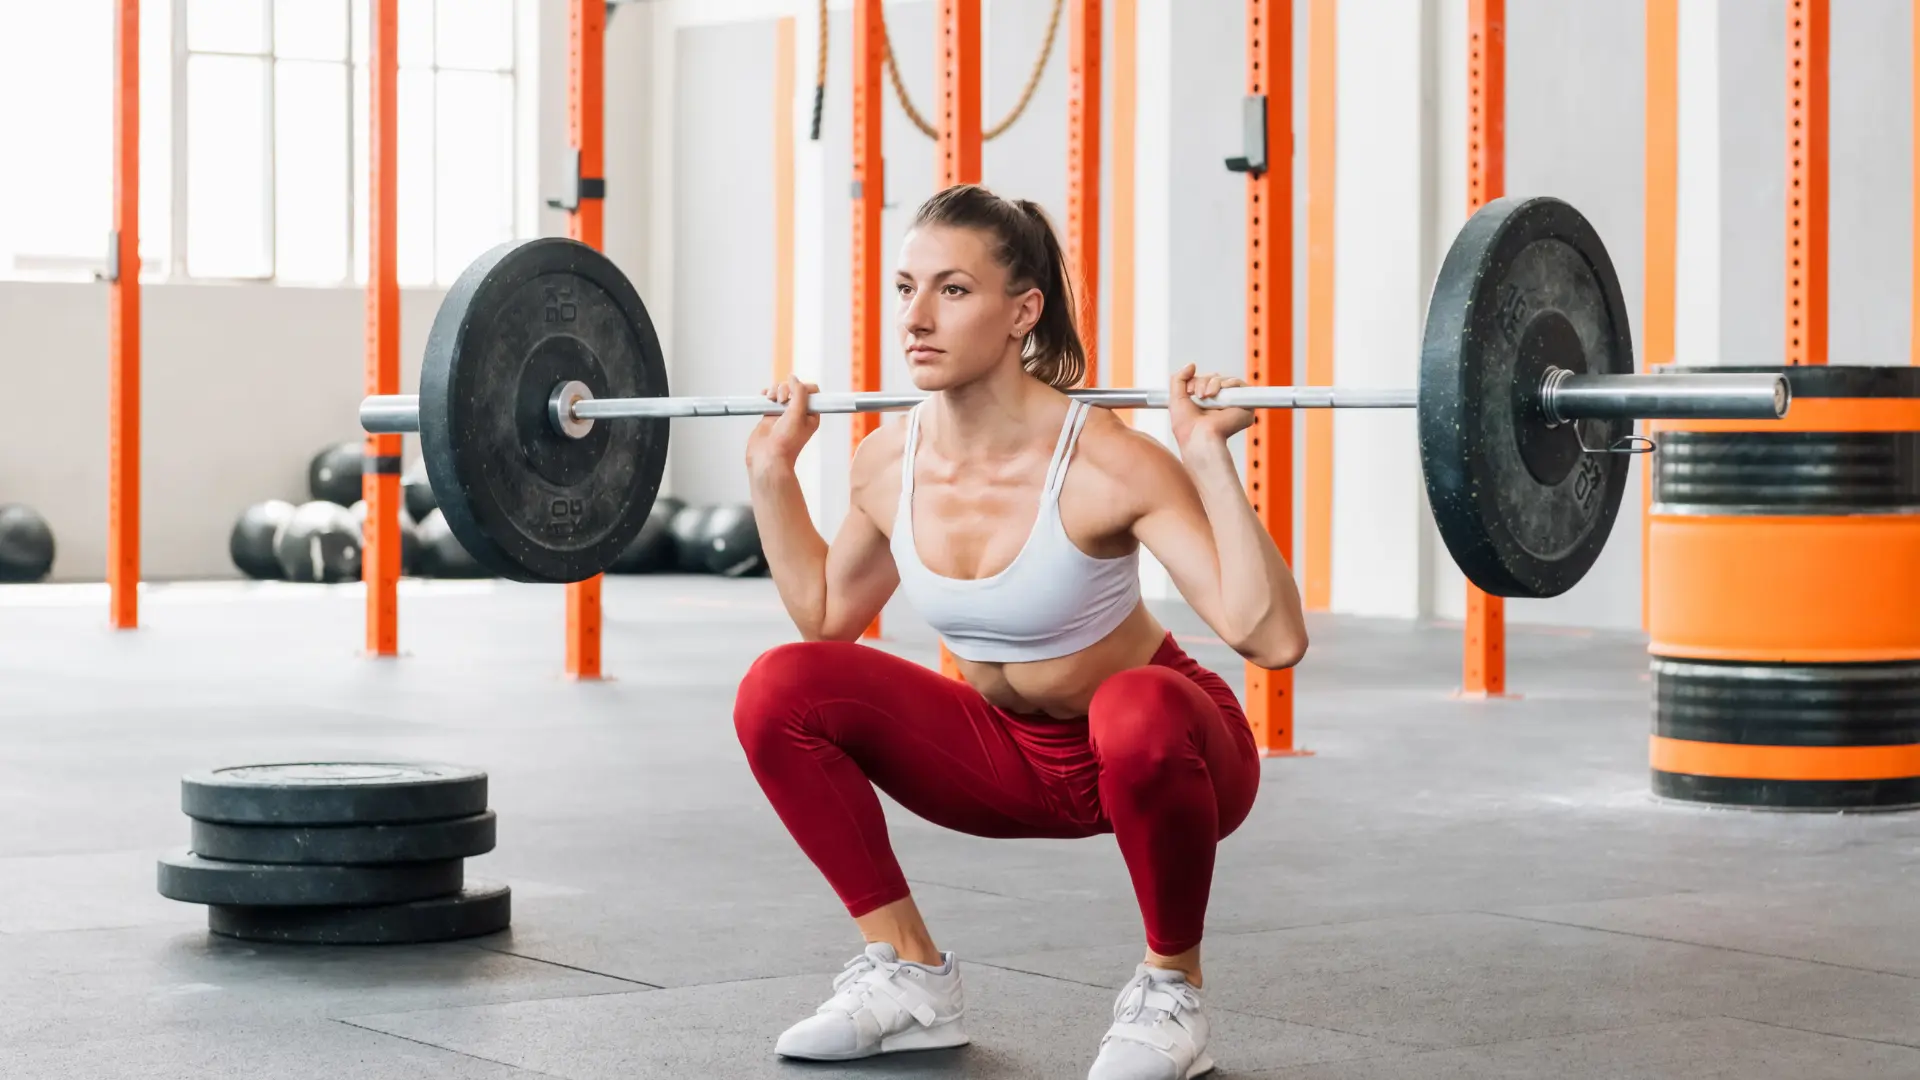 8 Best squat alternatives to gain strength and muscle mass